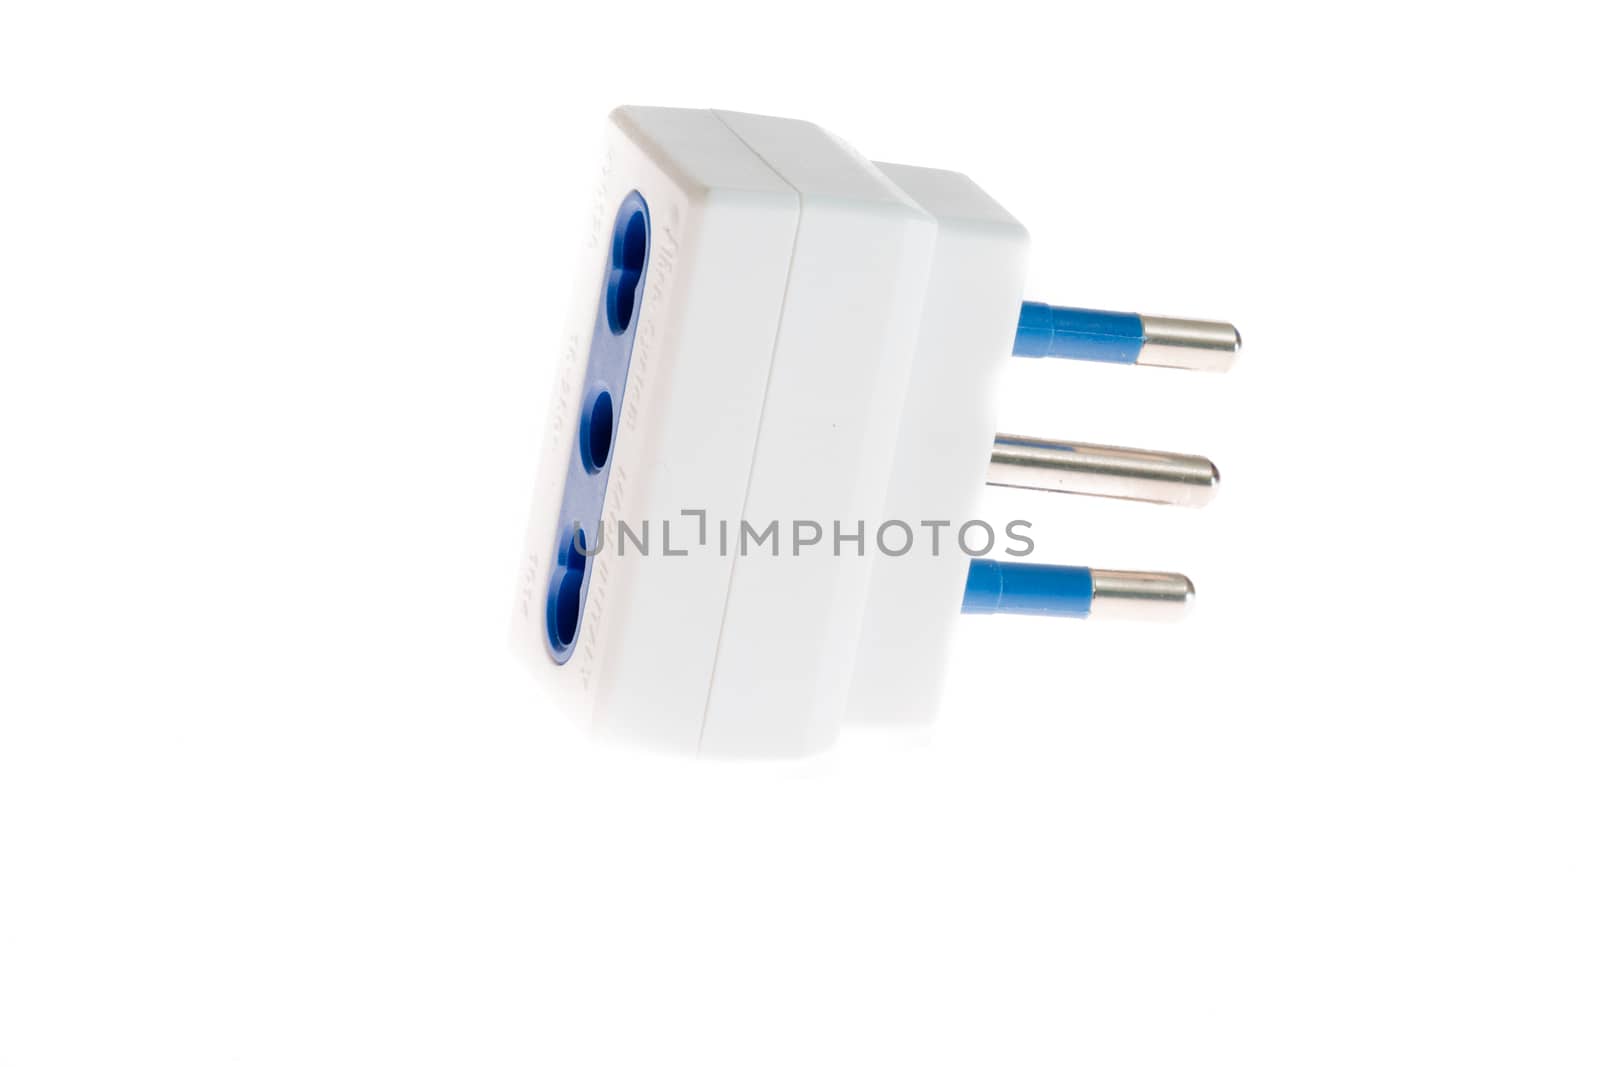 Withe Italian plug 16 ampere and adapter